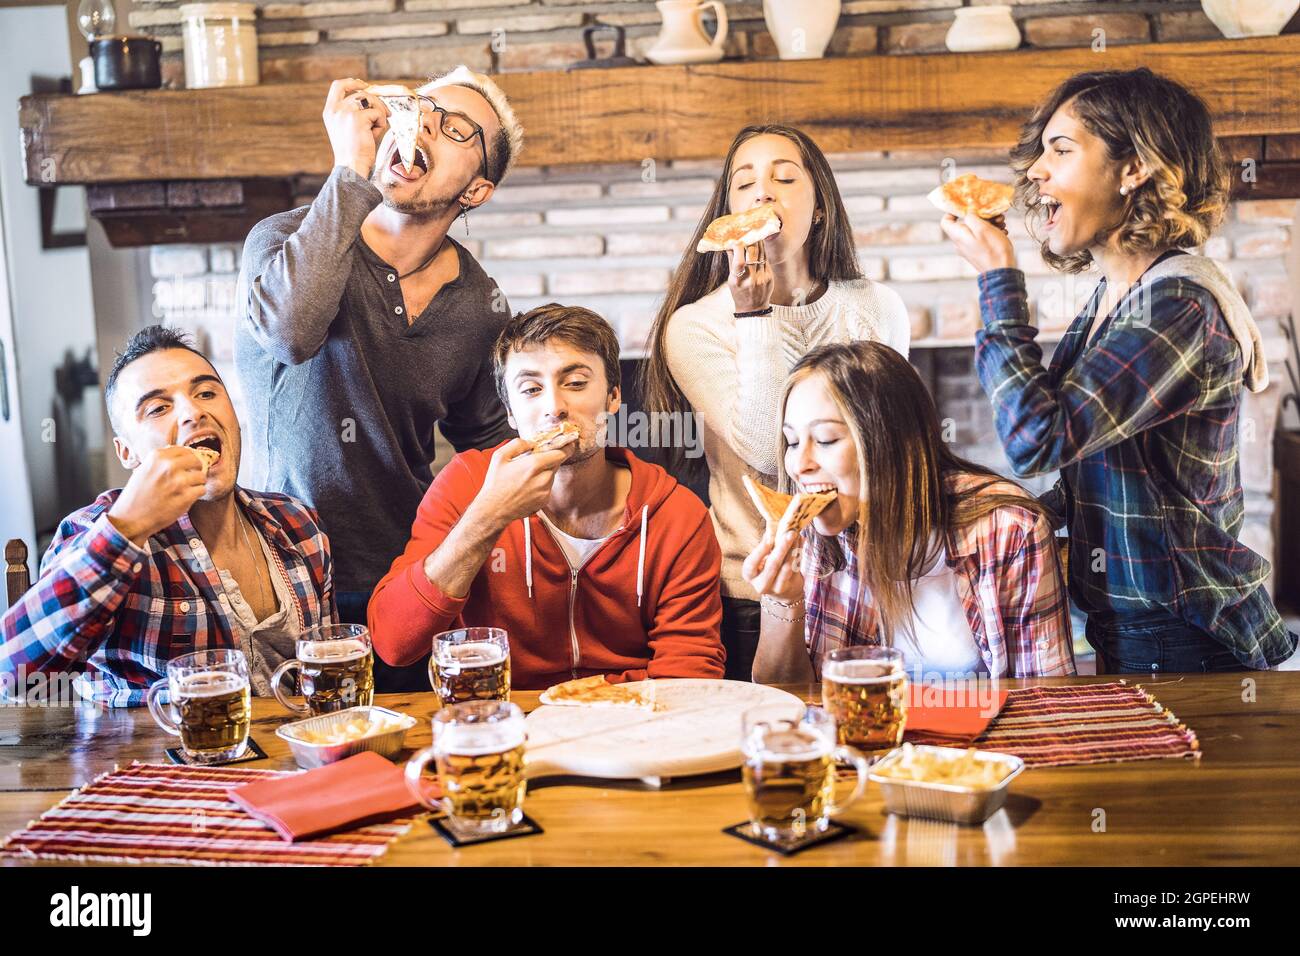 Happy friends group eating pizza at chalet restaurant house - Friendship concept with young people enjoying time together and having genuine fun Stock Photo